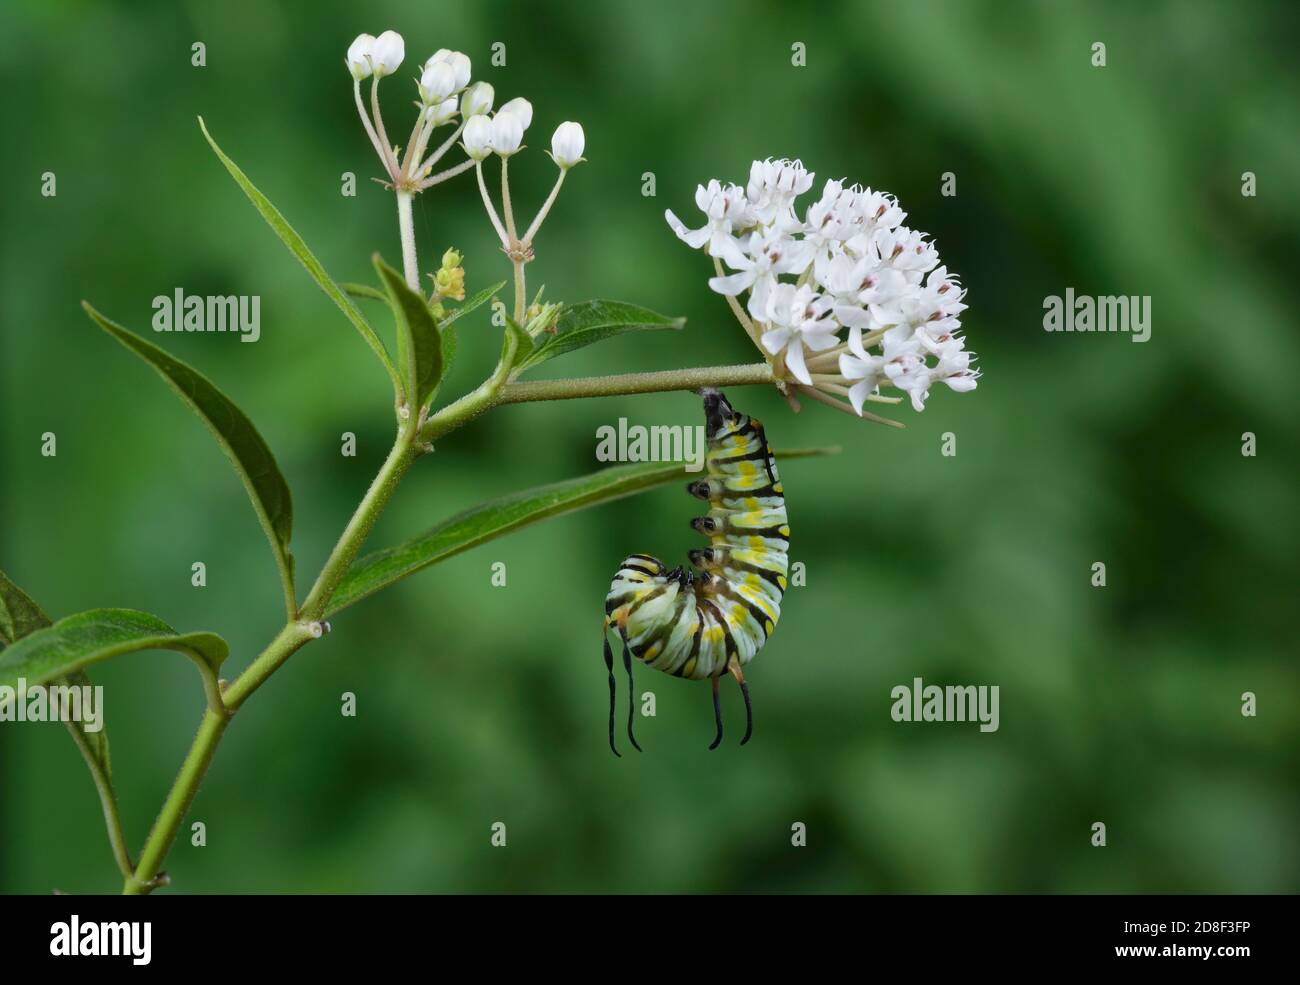 Queen (Danaus gilippus), caterpillar pupating on Aquatic Milkweed (Asclepias perennis), series, Hill Country, Central Texas, USA Stock Photo